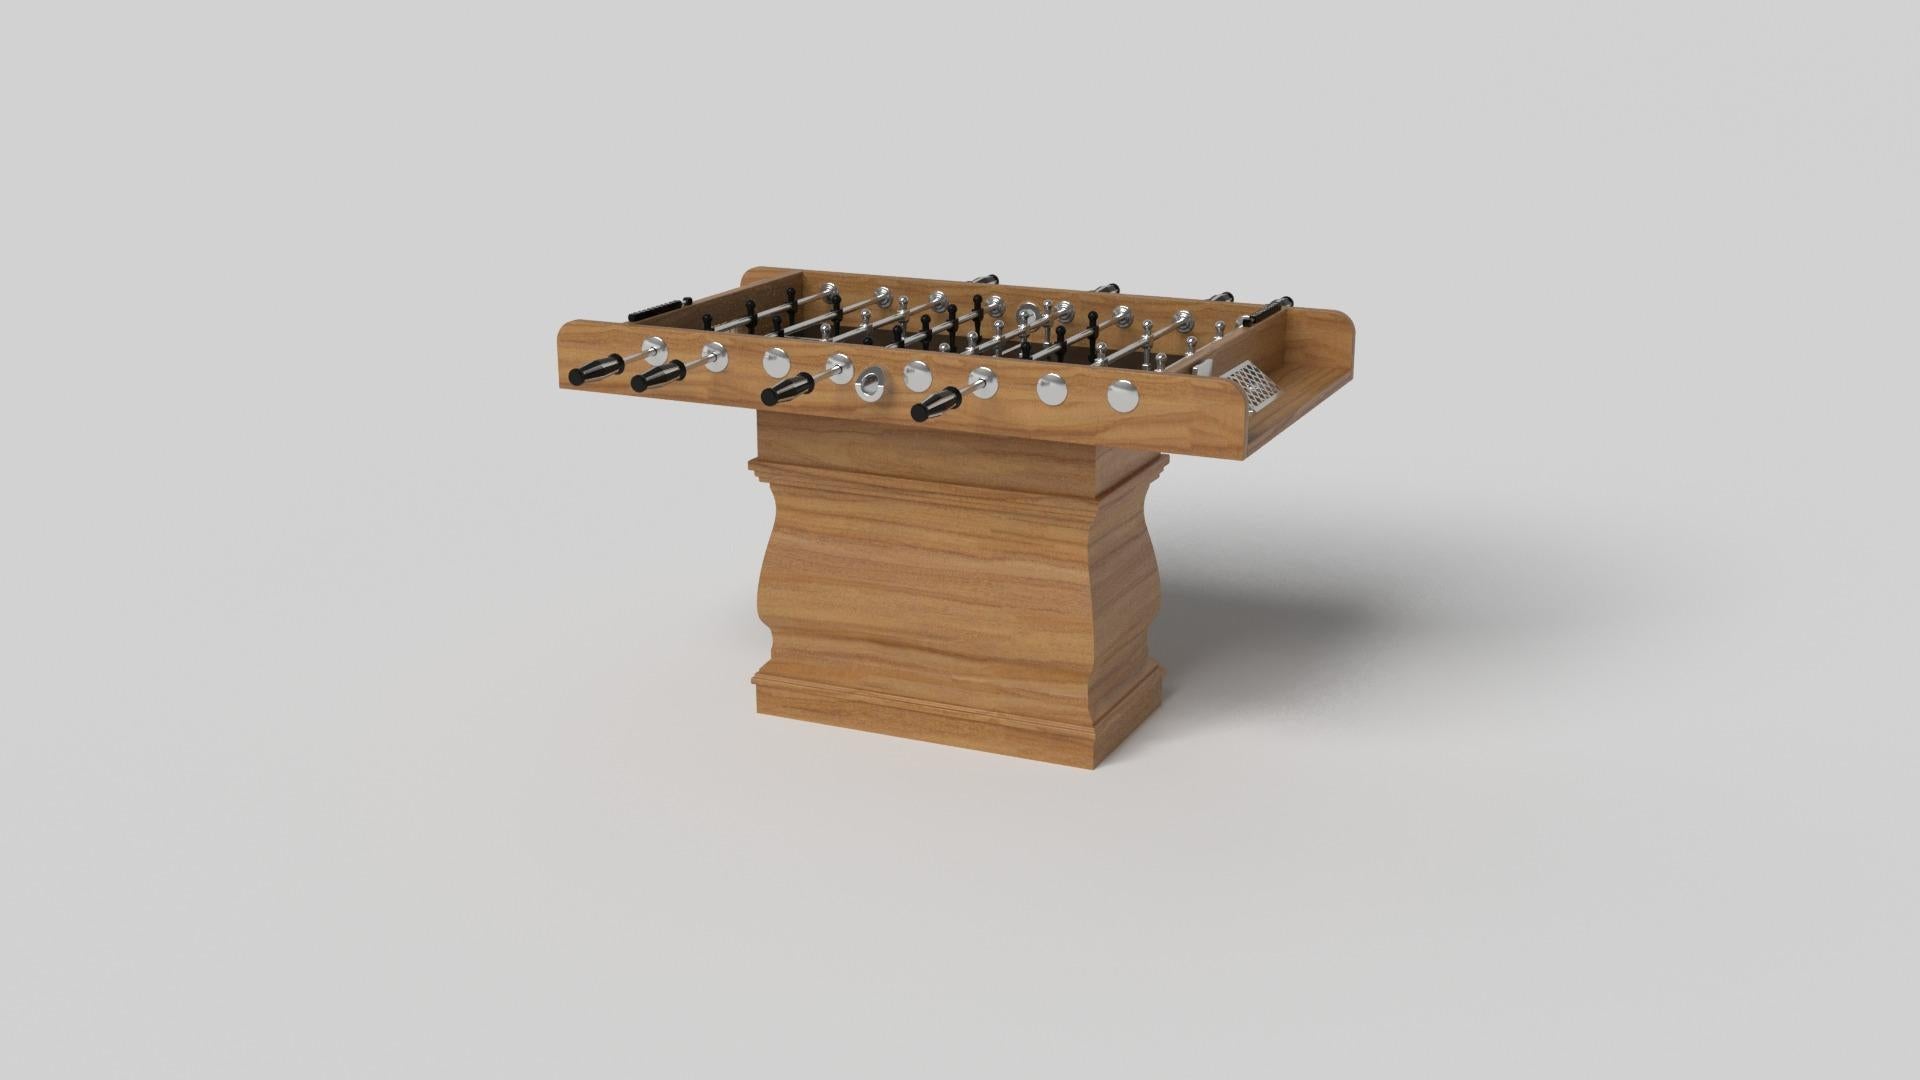 A single hand-sculpted leg bestows a sense of classic style upon this handcrafted foosball table in white. This luxury wood game table features a smooth rectangular top perched upon two wide baluster column legs that mimic the curves and lines of